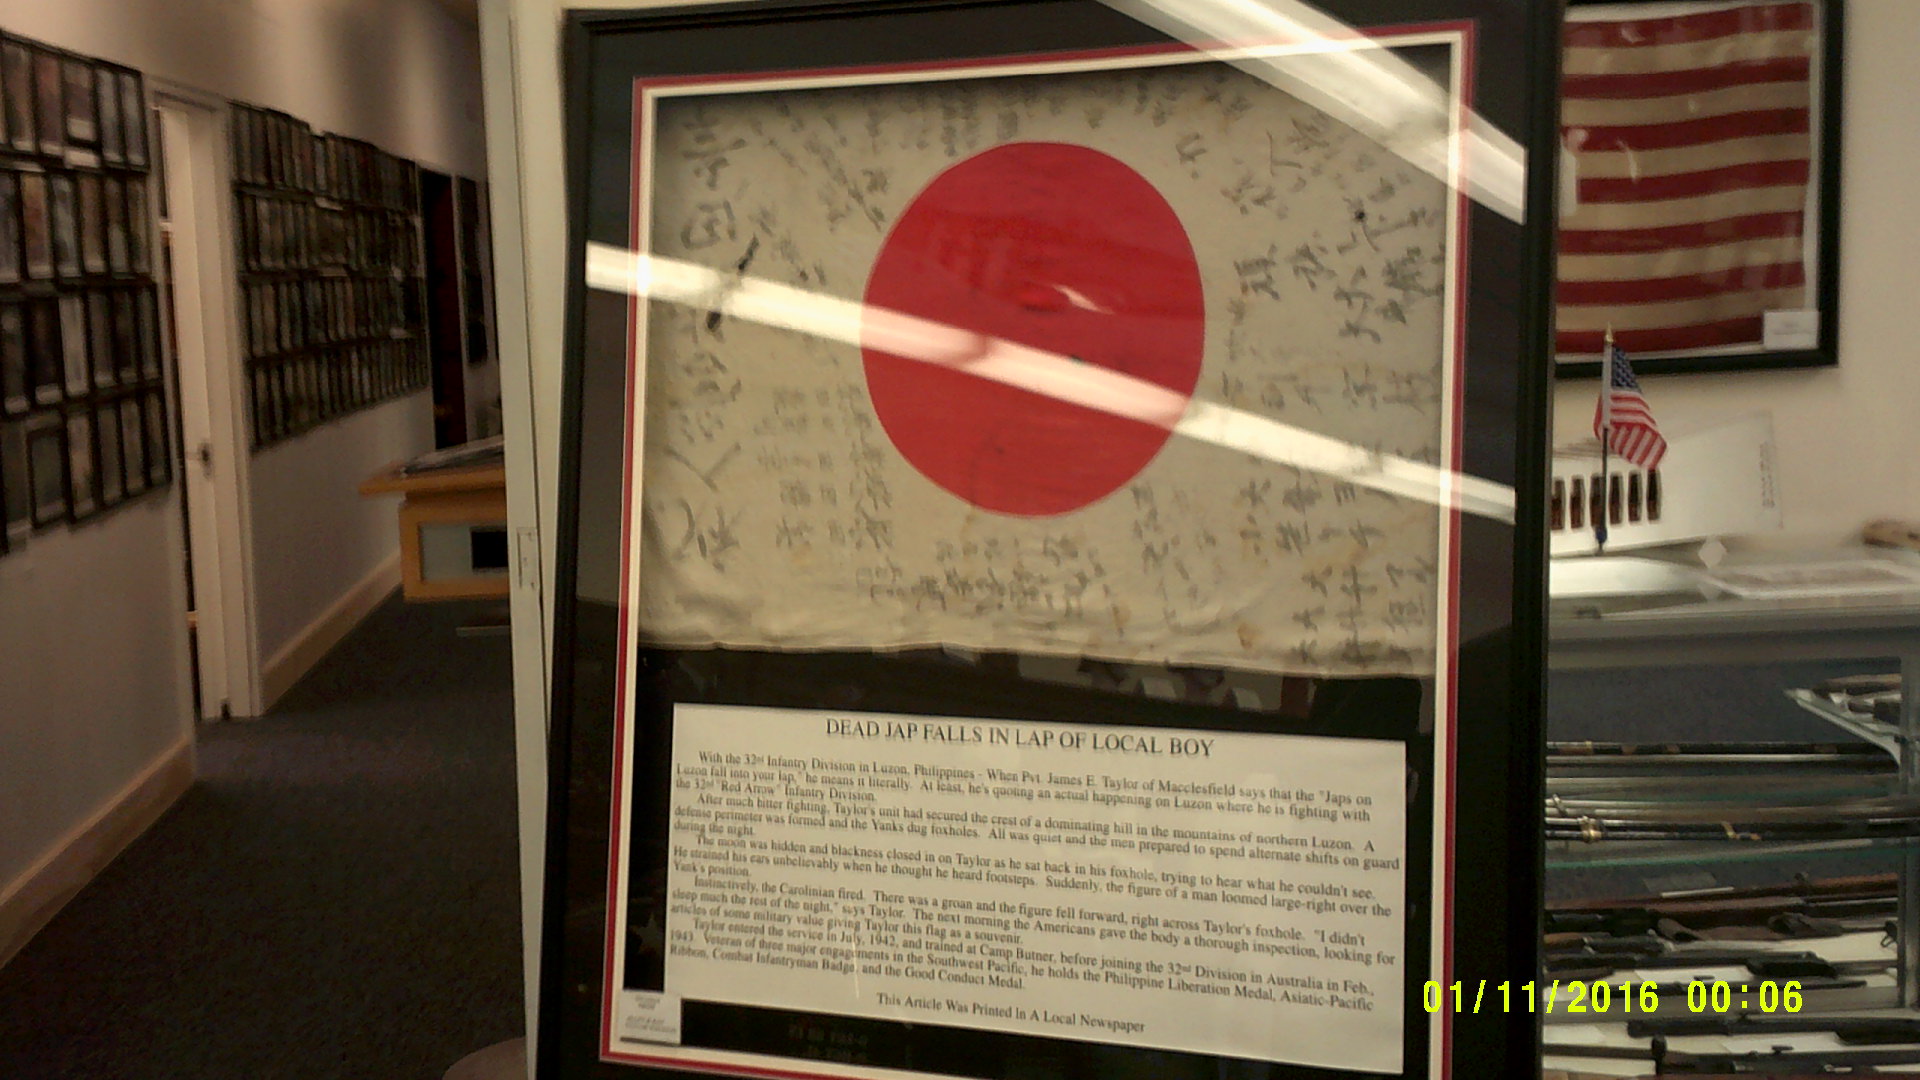 A Japanese flag taken from a Nippon soldier at Iwo Jima.